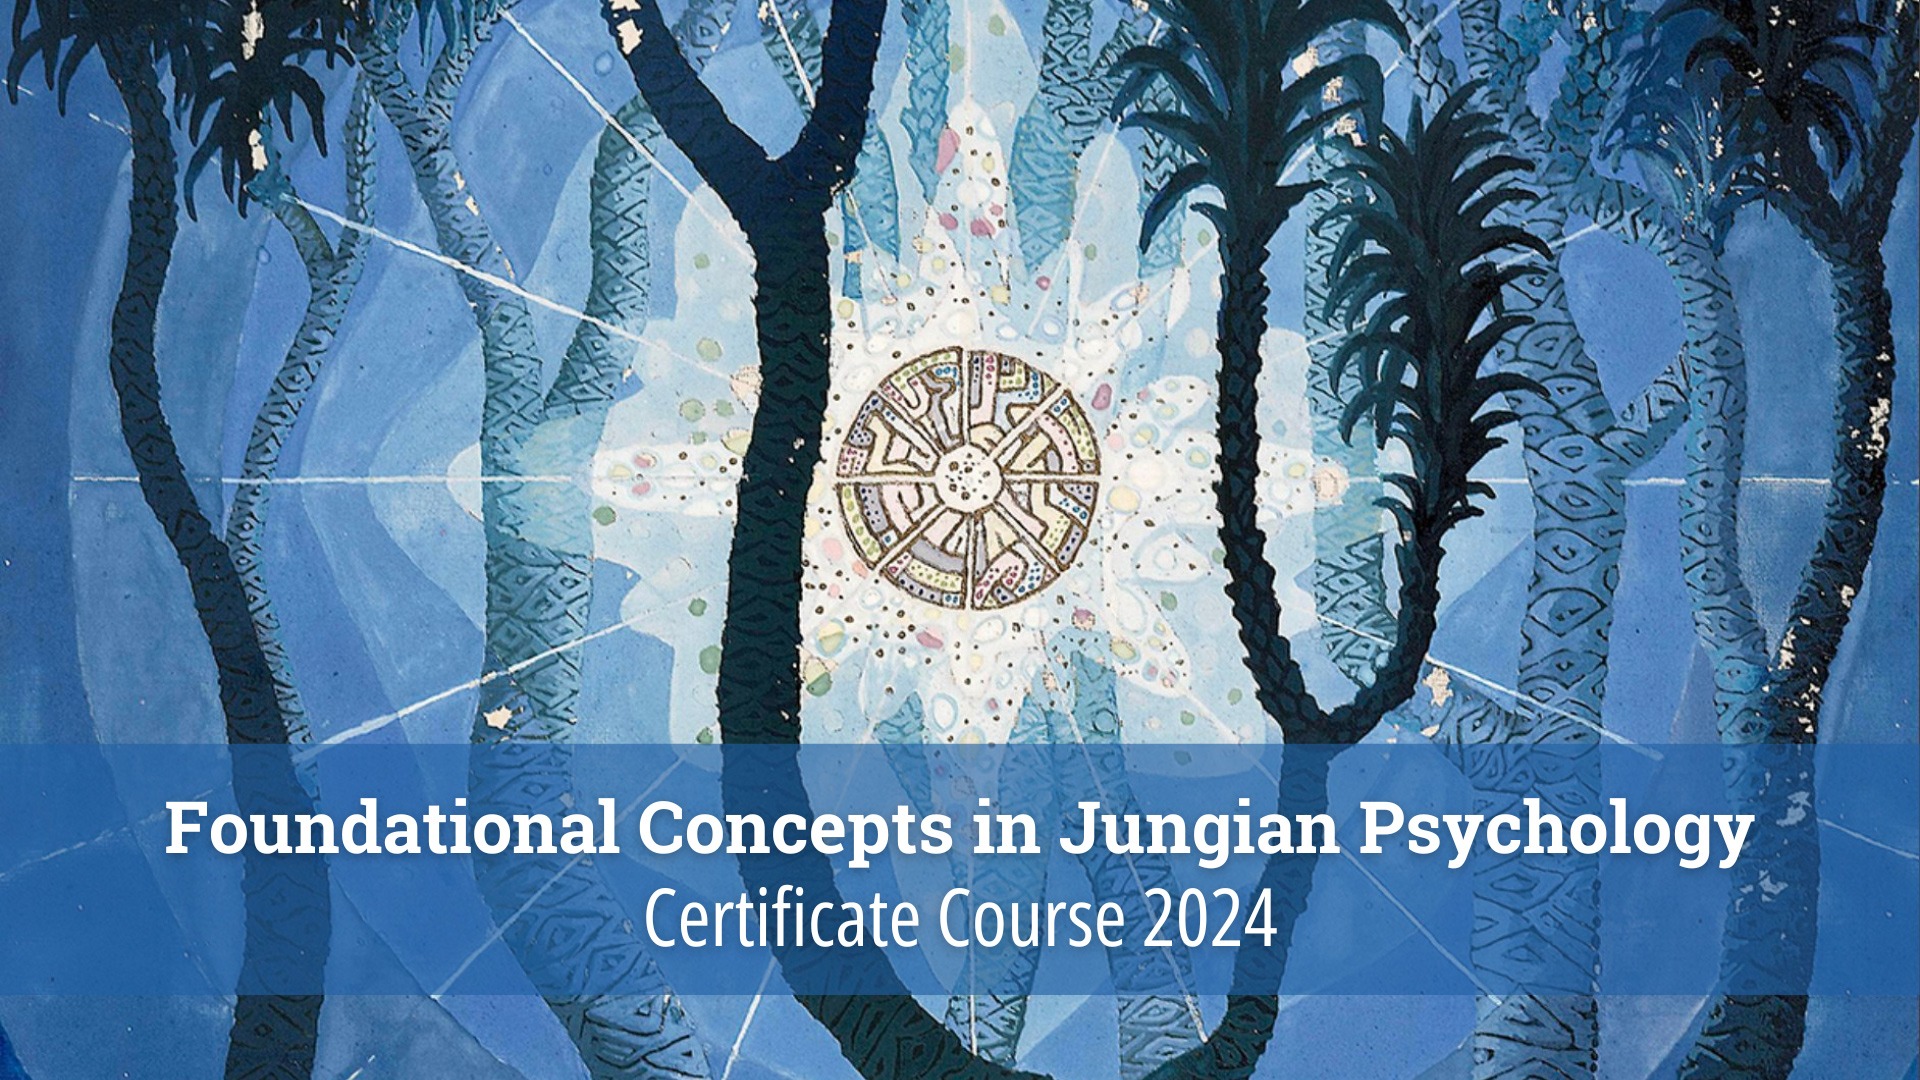 Certificate Course 2024: Foundational Concepts in Jungian Psychology